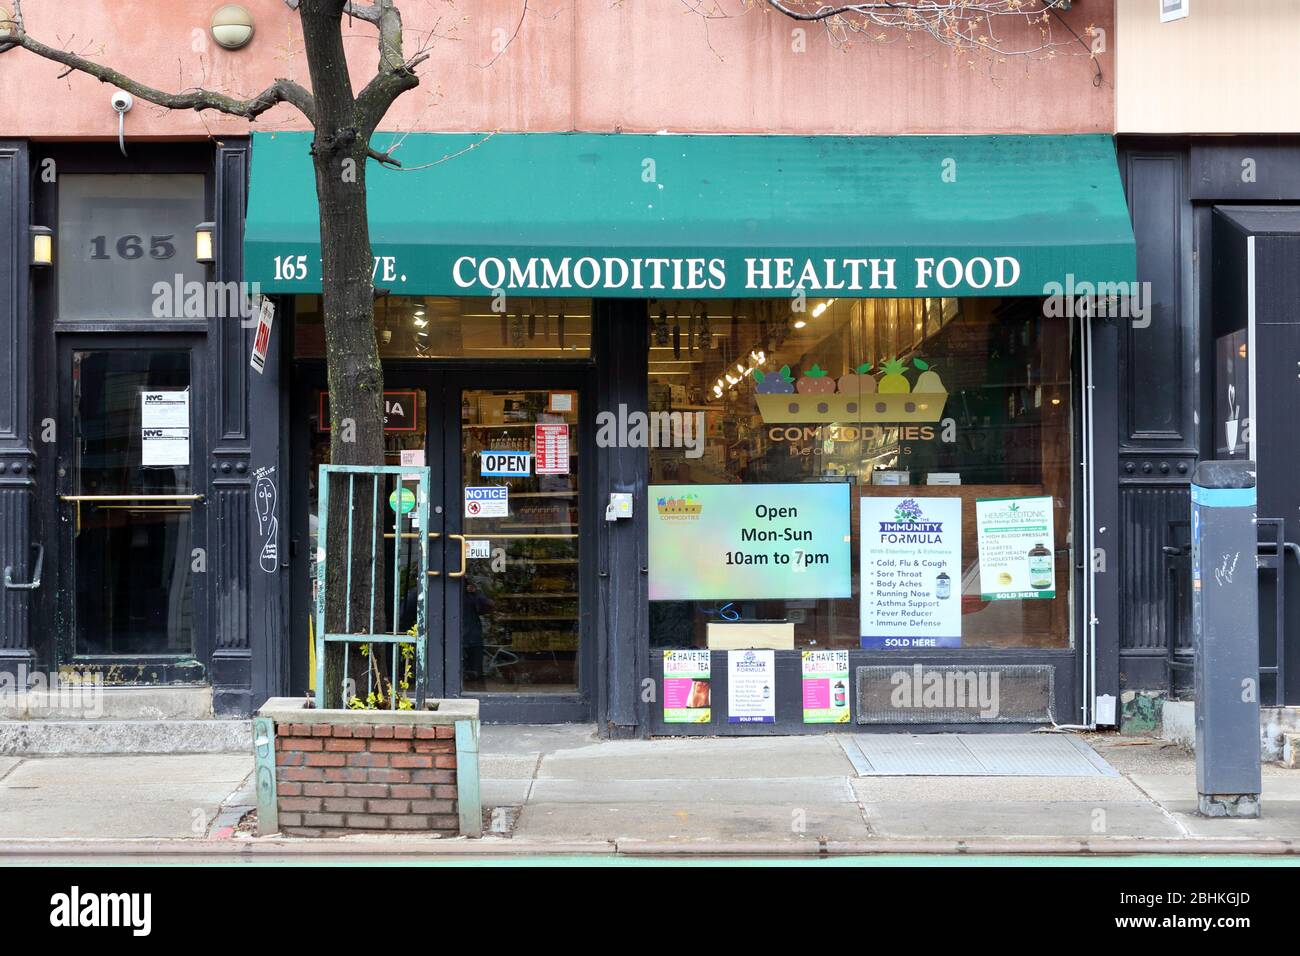 Commodities Health Food, 165 1st Avenue, New York, NY. exterior storefront of an organic health food store in Manhattan's East Village. Stock Photo